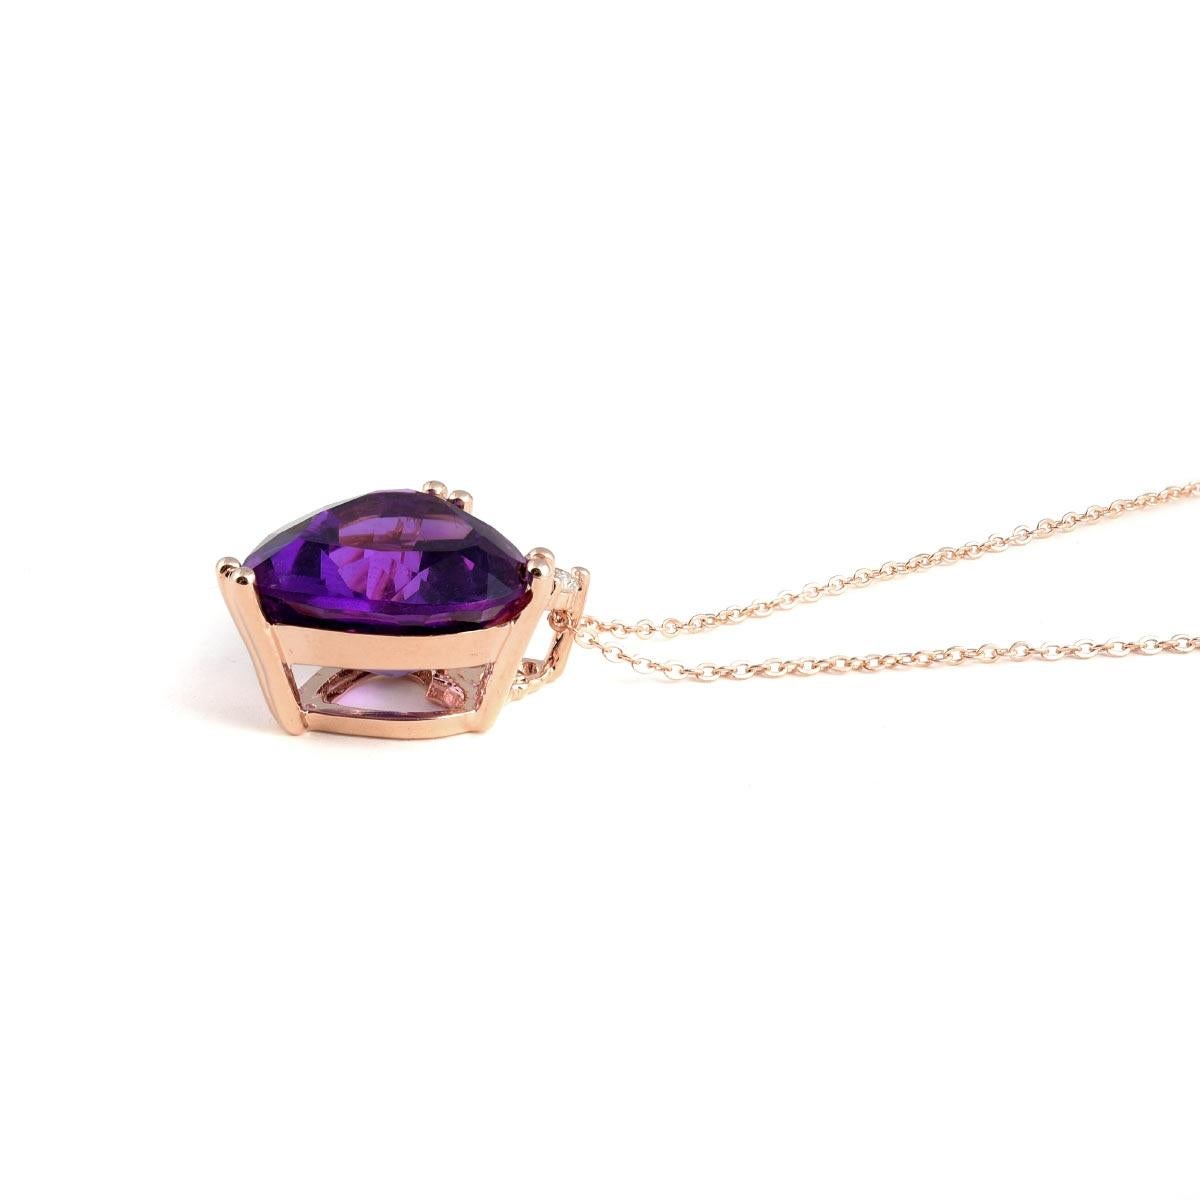 Set with a magnificent Amethyst, here is a lovely 2.55 carat gem that will proclaim your love loud and clear. With its rich aubergine hues, this unrivalled gem has both exceptional color and an eye clear internal appearance. Paired also with